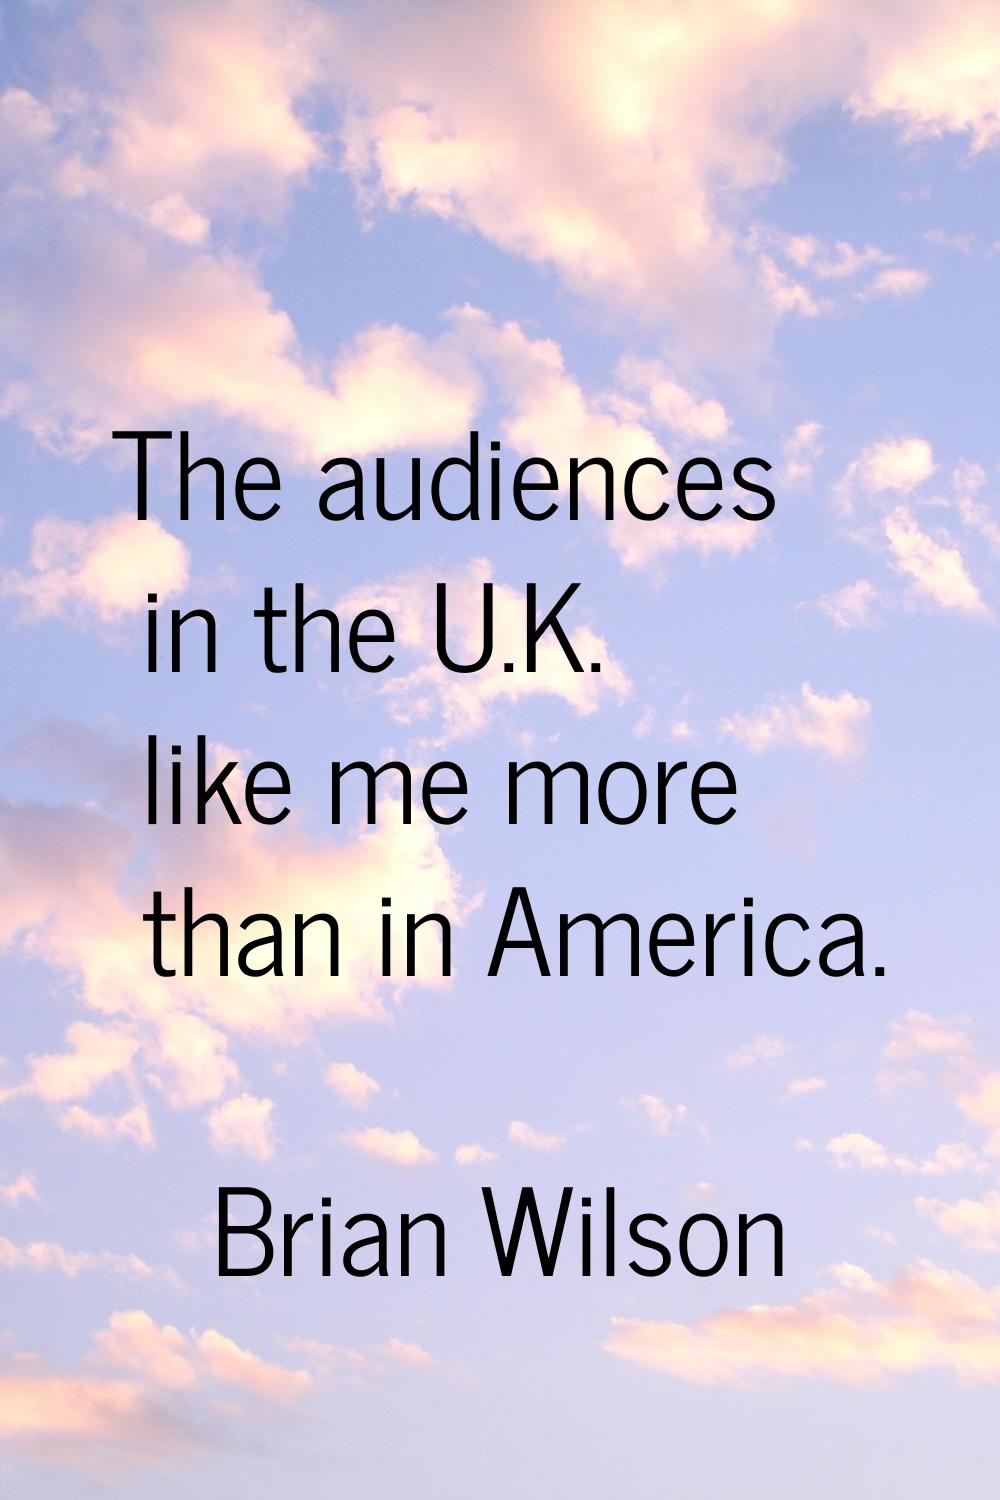 The audiences in the U.K. like me more than in America.